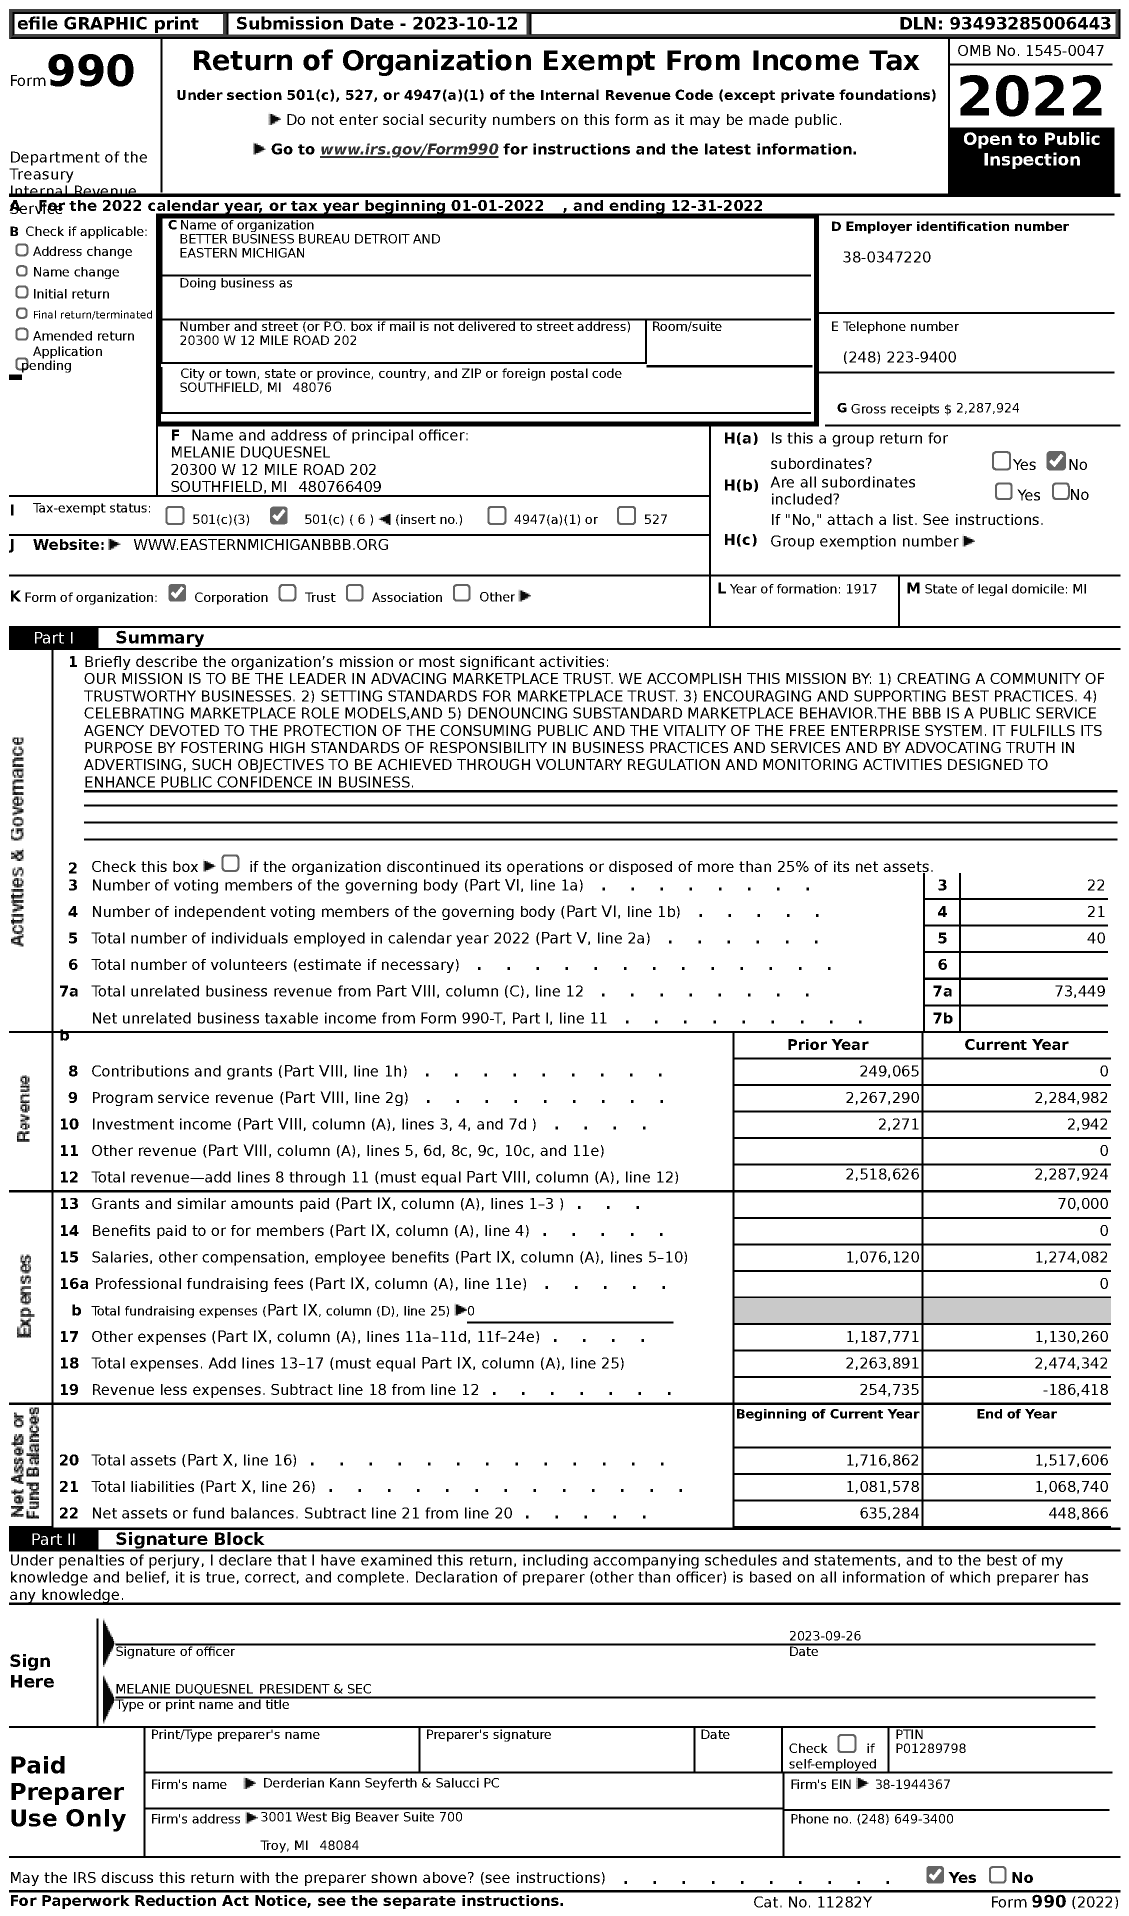 Image of first page of 2022 Form 990 for Better Business Bureau Detroit and Eastern Michigan (BBB)